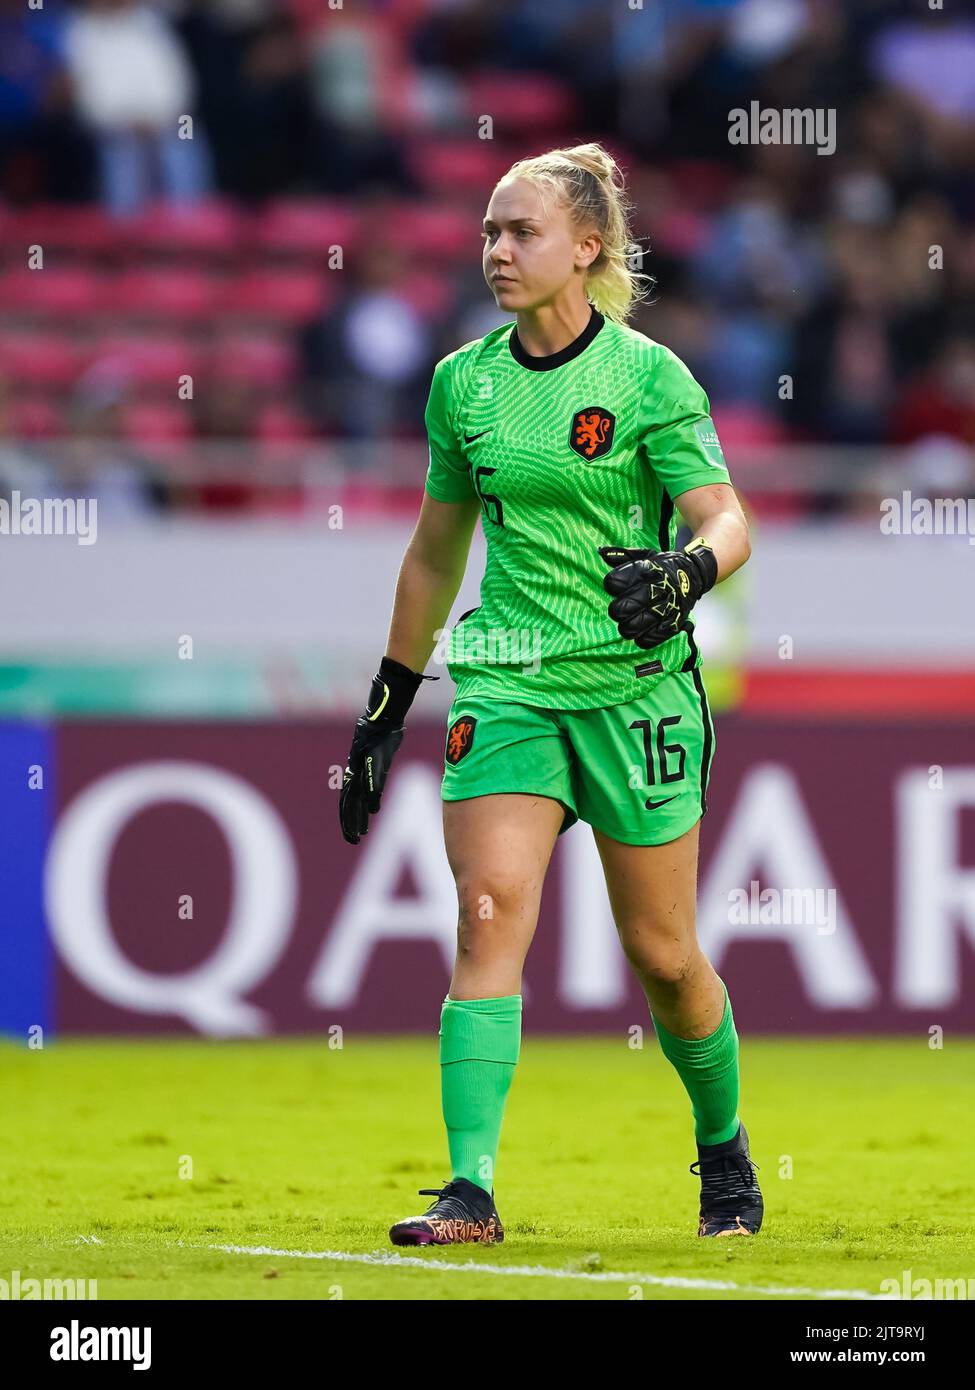 San Jose, Costa Rica. 28th Aug, 2022. San Jose, Costa Rica, August 28th 2022: Goalkeeper Lisan Alkemade (16 Netherlands) looks on during the FIFA U20 Womens World Cup Costa Rica 2022 football 3rd place match between Netherlands and Brazil at Estadio Nacional in San Jose, Costa Rica. (Daniela Porcelli/SPP) Credit: SPP Sport Press Photo. /Alamy Live News Stock Photo